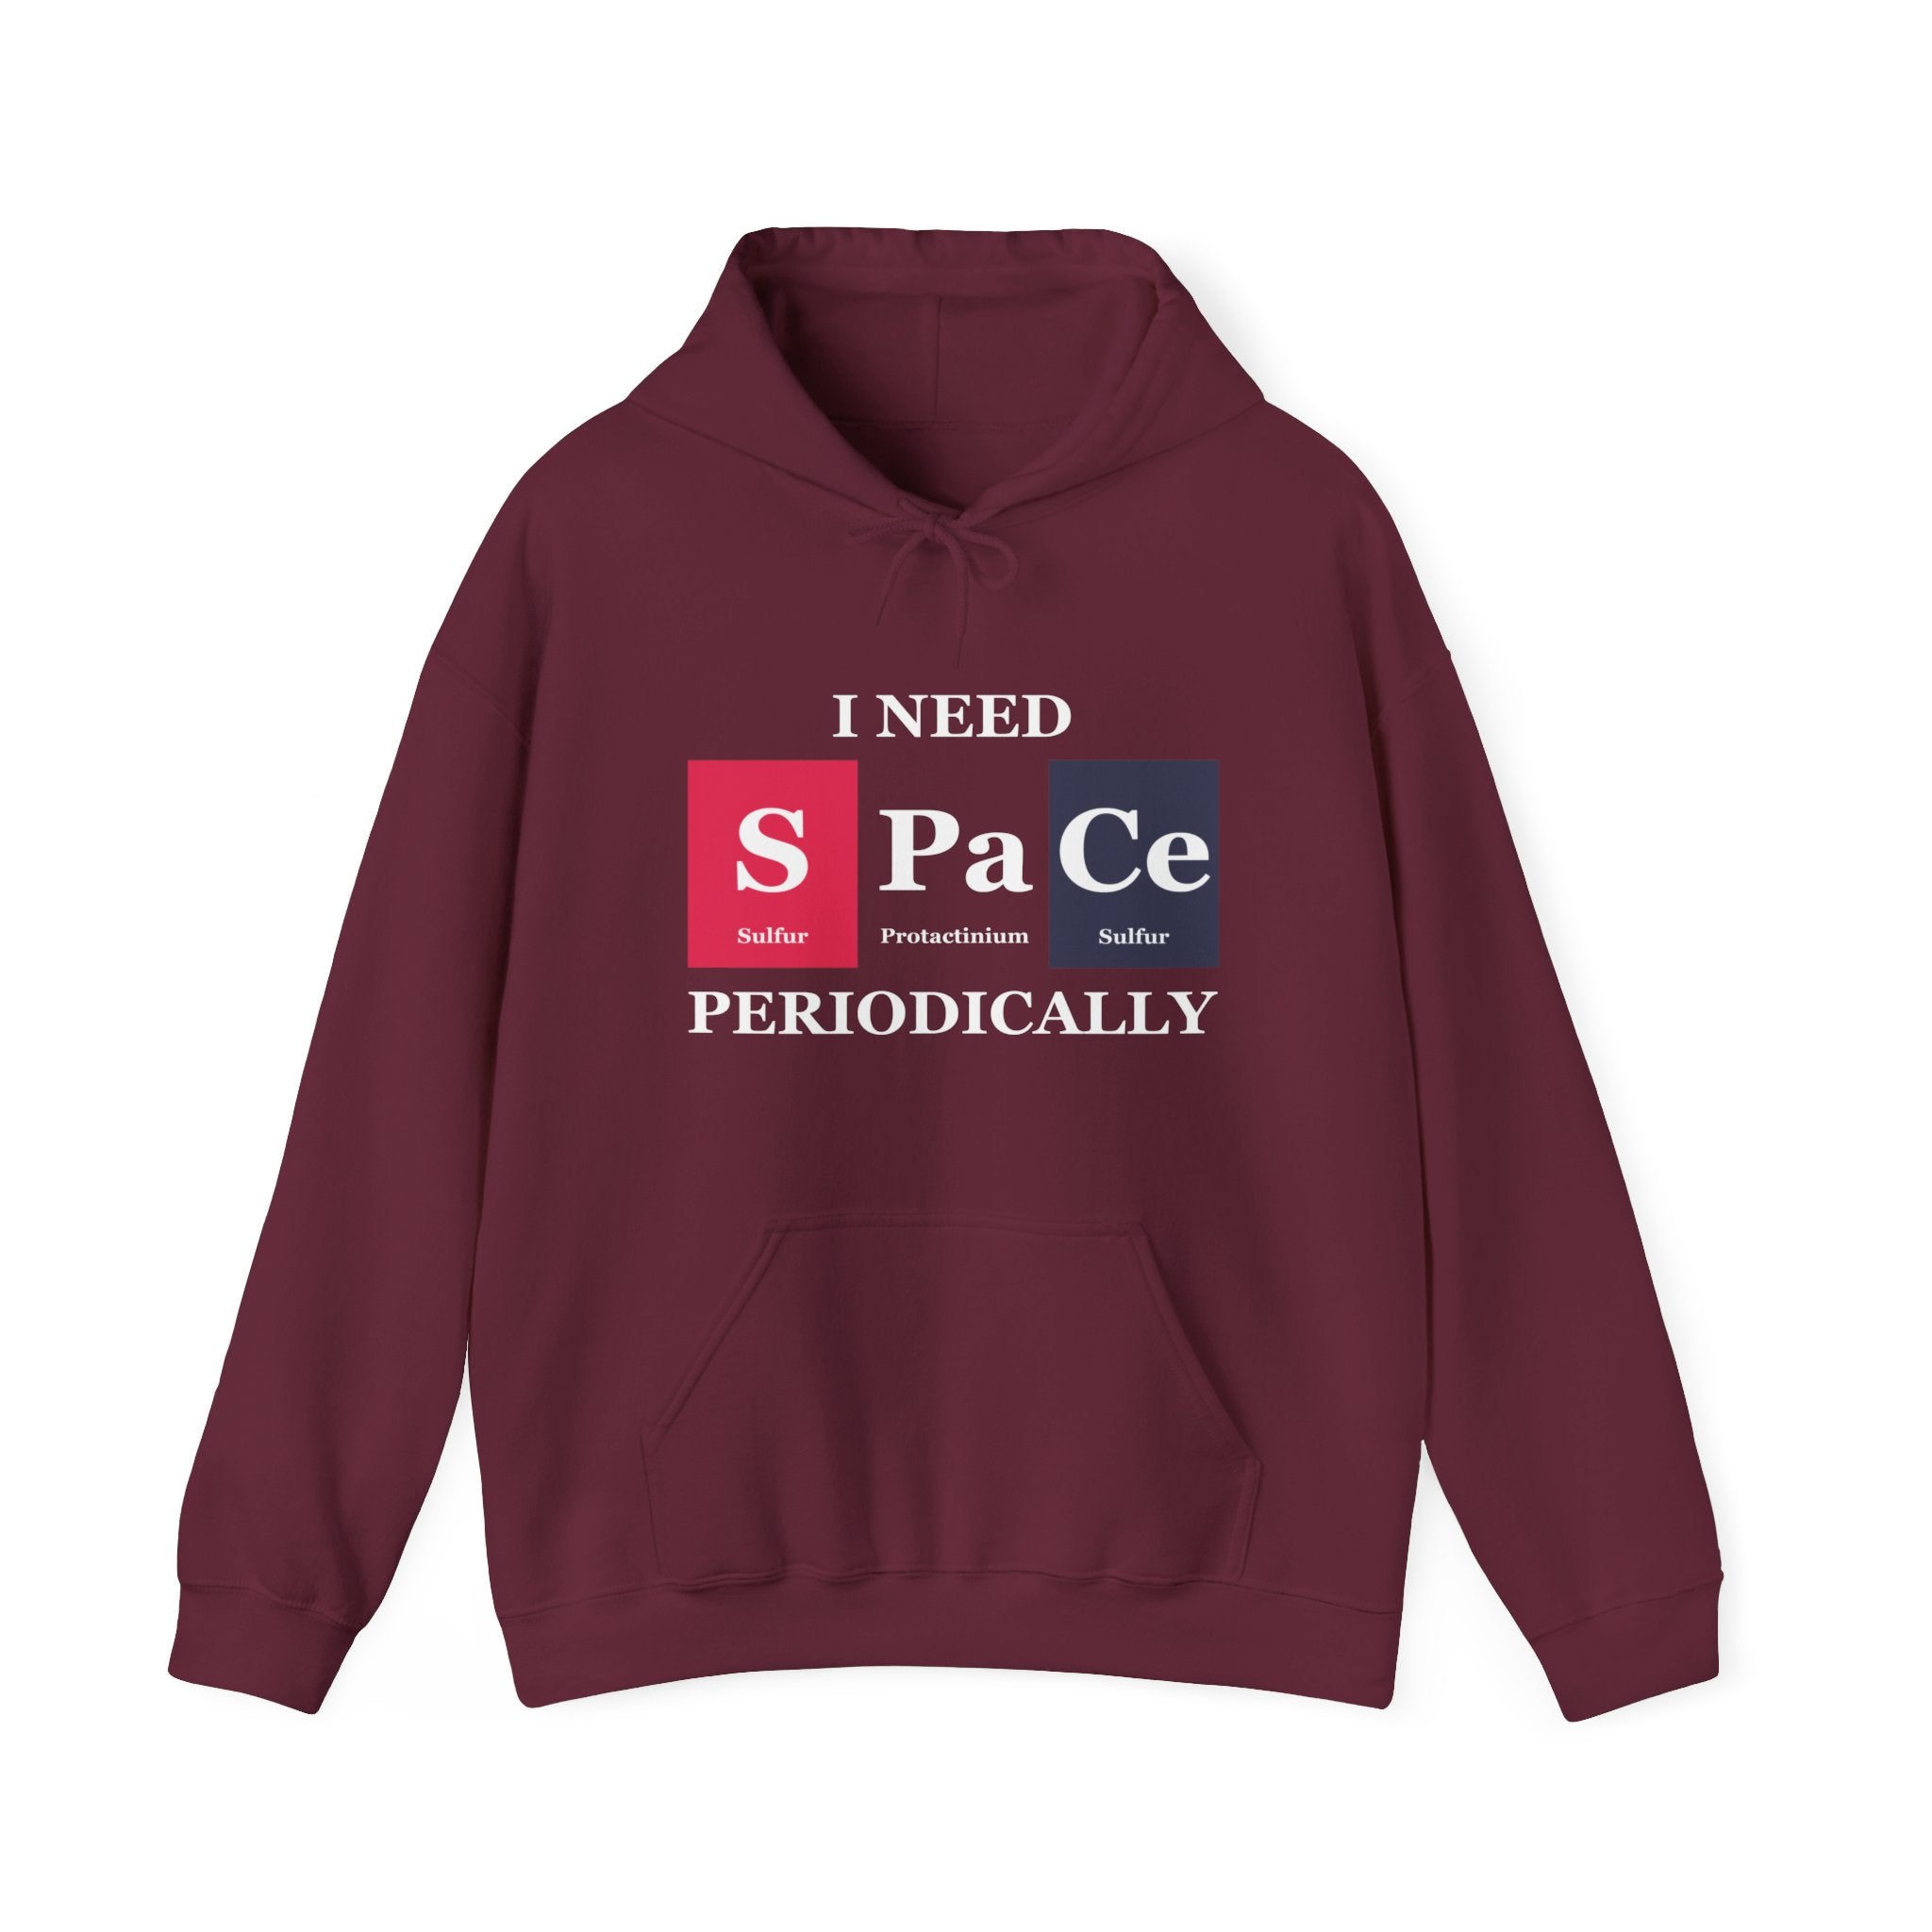 Vibrant maroon S-Pa-Ce - Hooded Sweatshirt with text: "I NEED S Pa Ce PERIODICALLY," using periodic table elements symbols for Sulfur (S), Protactinium (Pa), and Cerium (Ce).